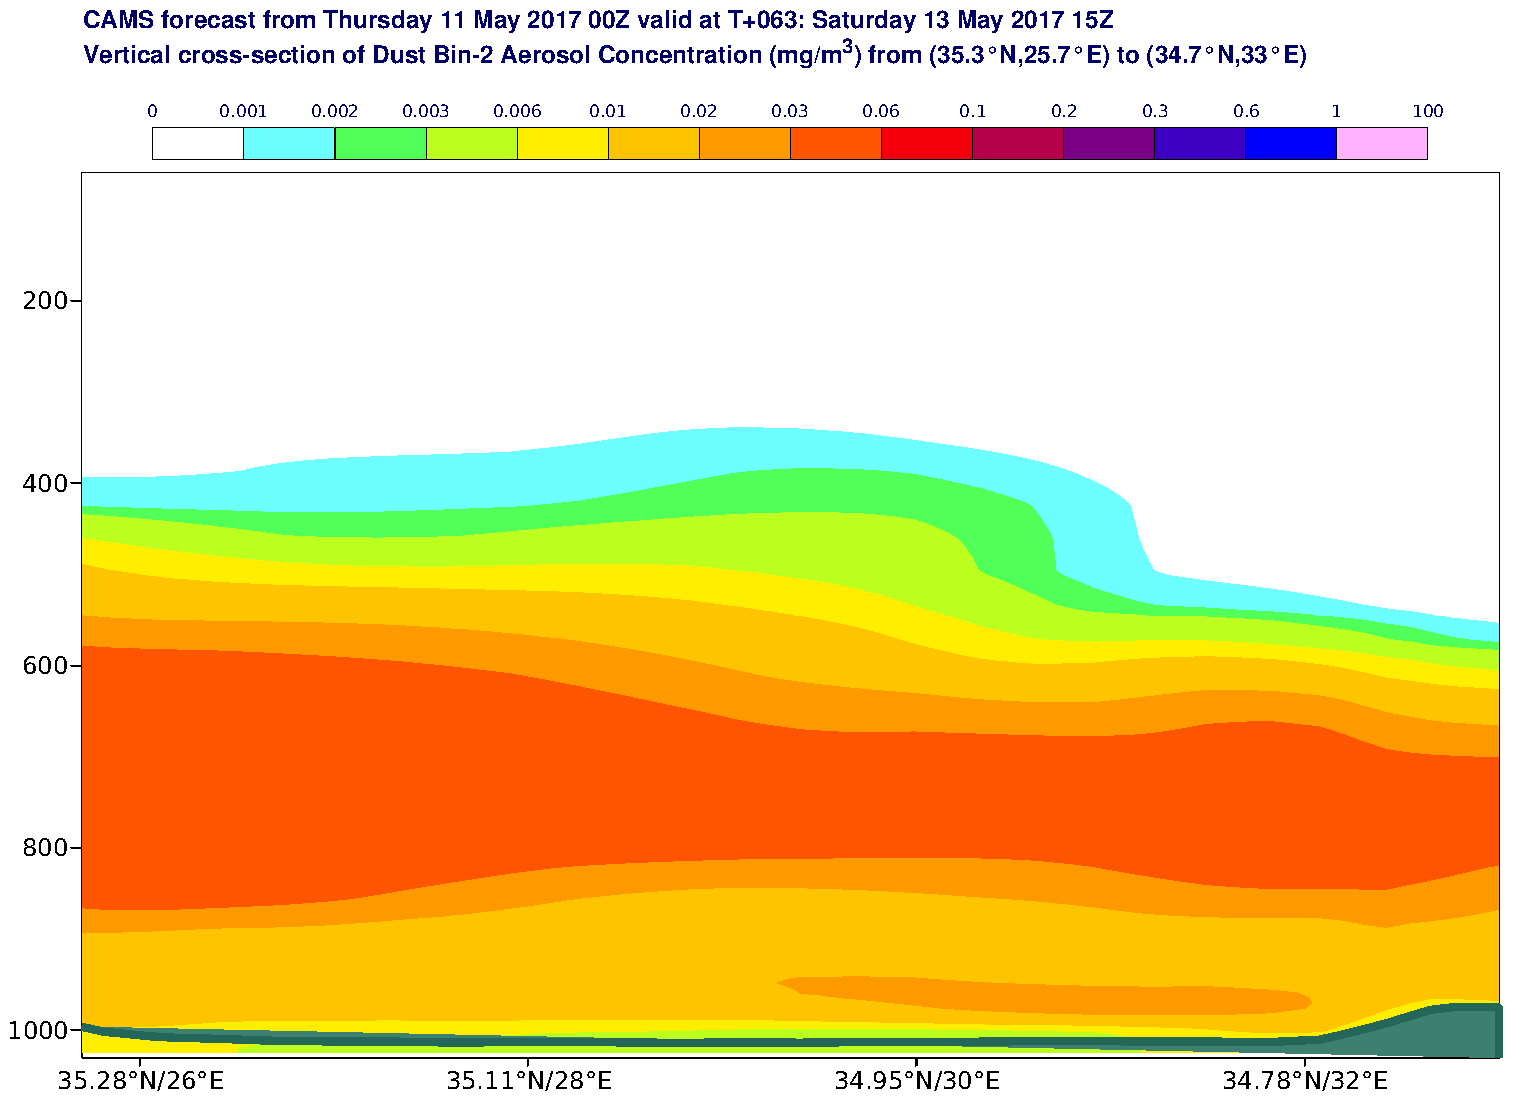 Vertical cross-section of Dust Bin-2 Aerosol Concentration (mg/m3) valid at T63 - 2017-05-13 15:00